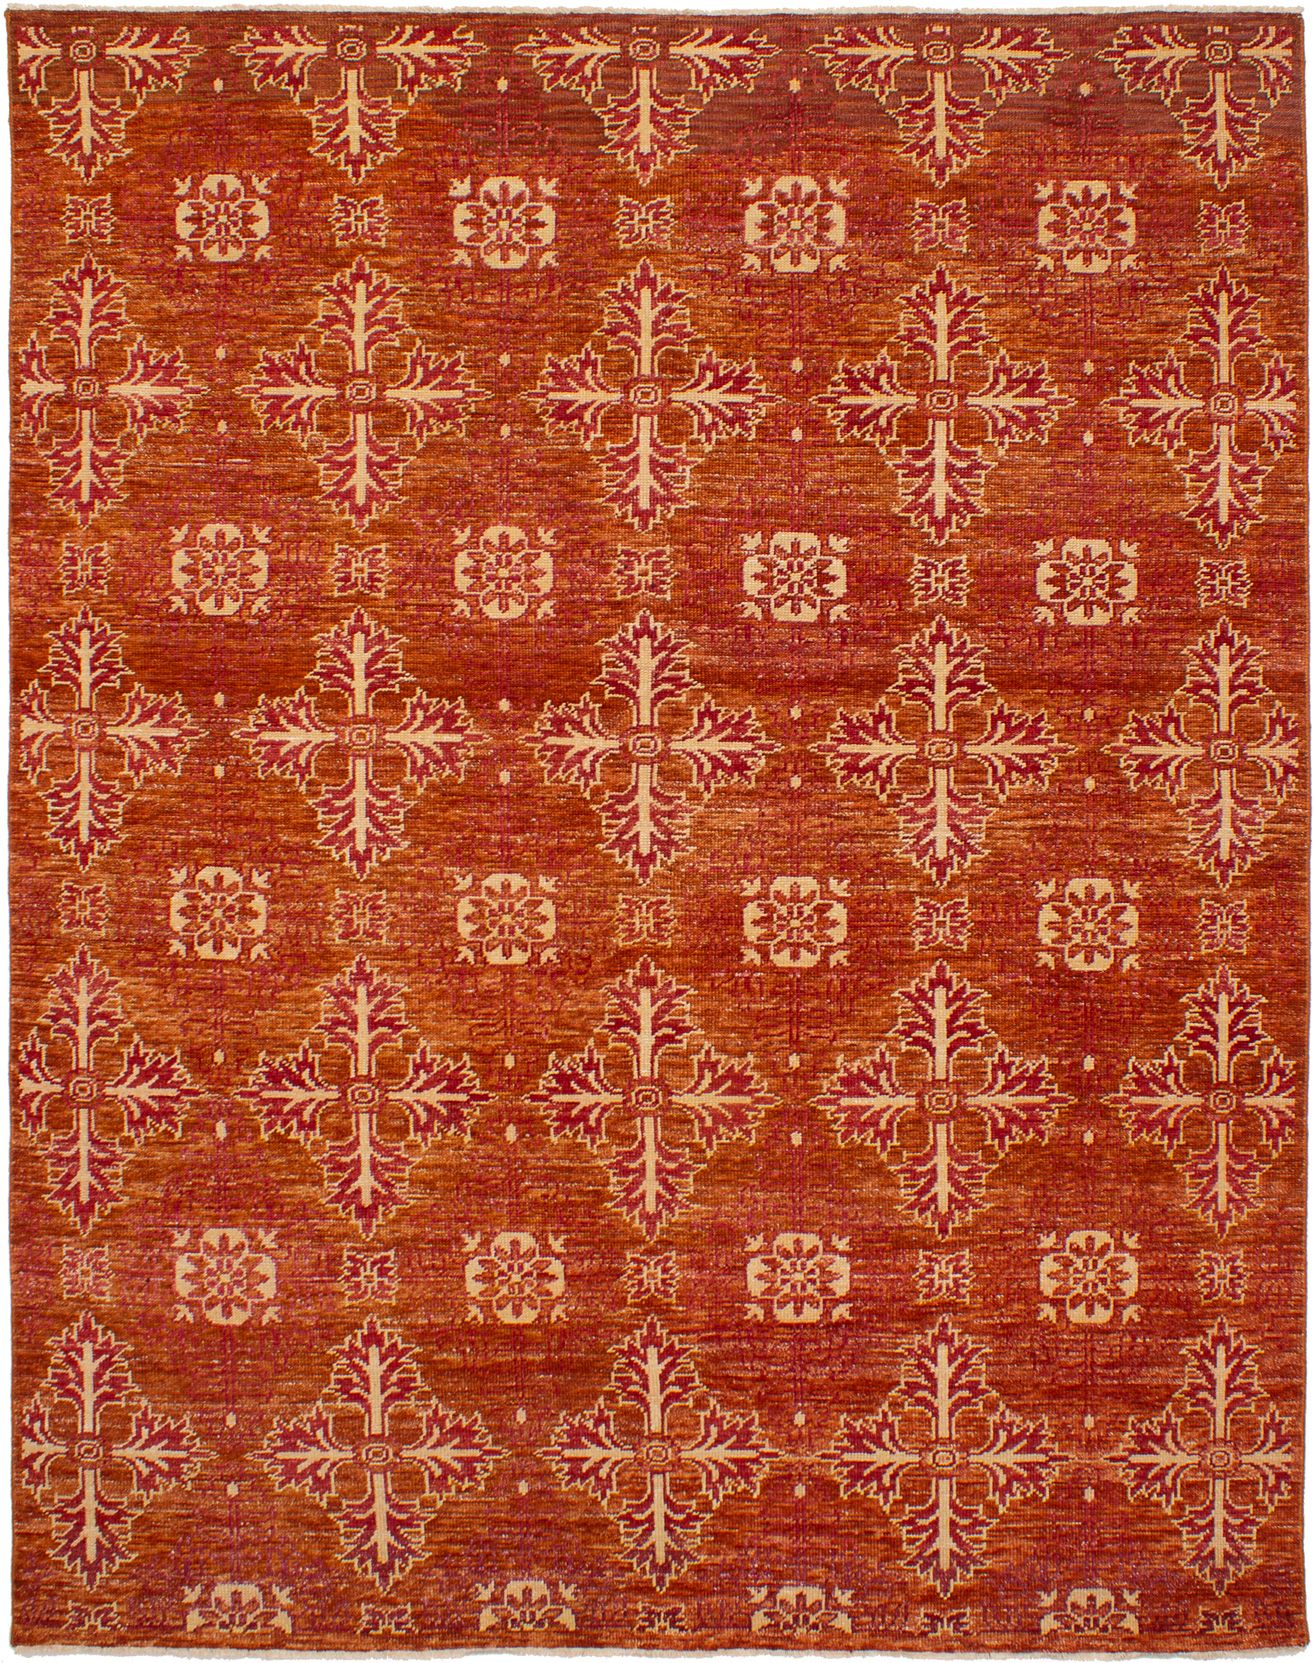 Hand-knotted Sierra Copper Wool Rug 7'9" x 9'10" Size: 7'9" x 9'10"  